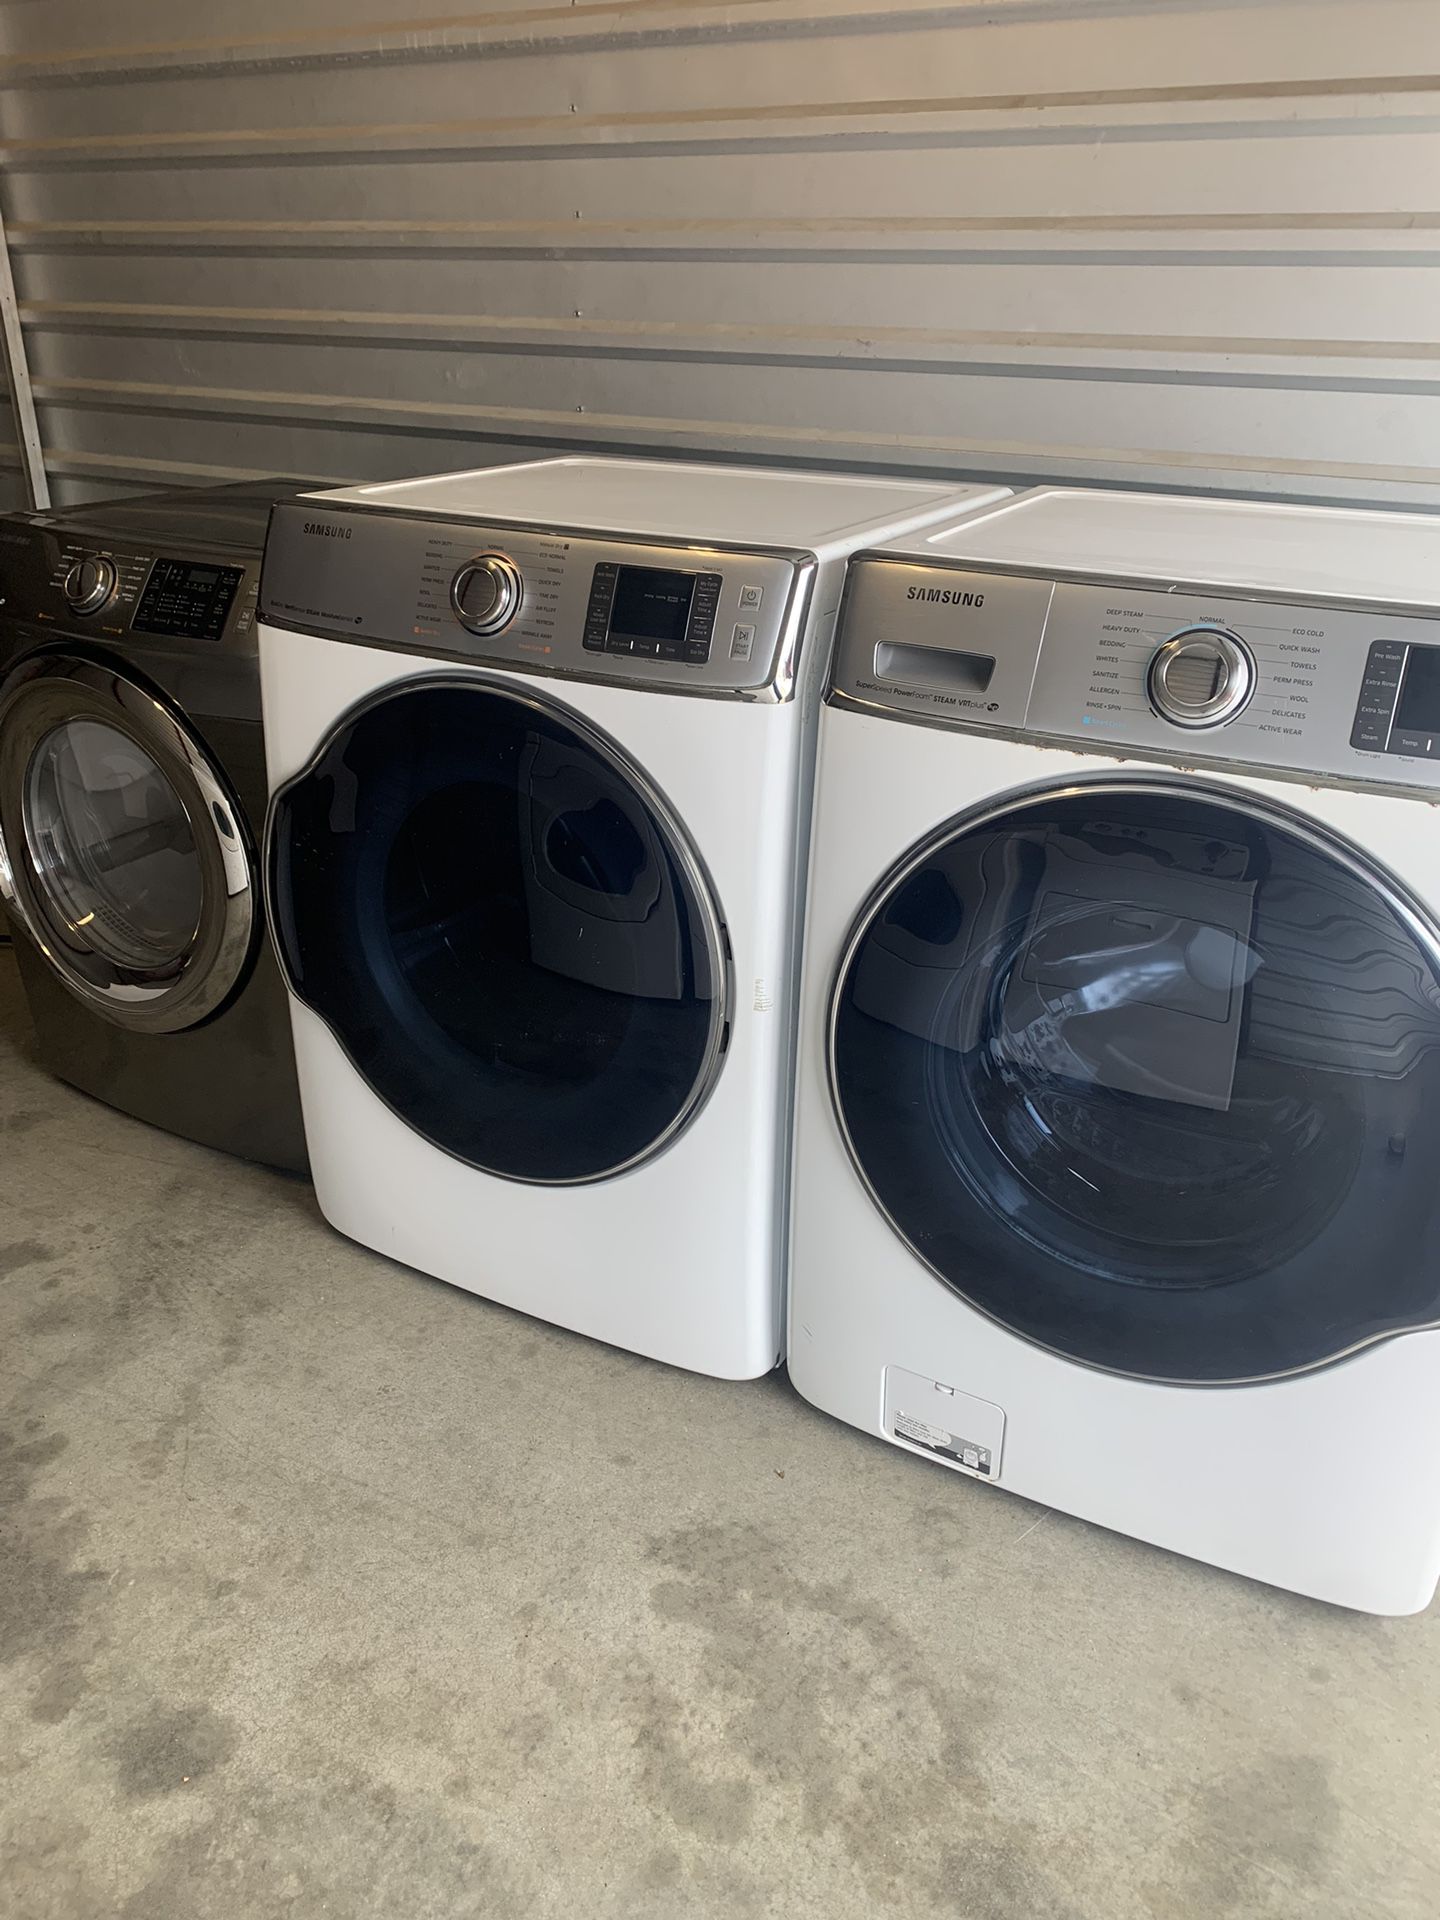 Large Capacity Samsung front load washer and dryer